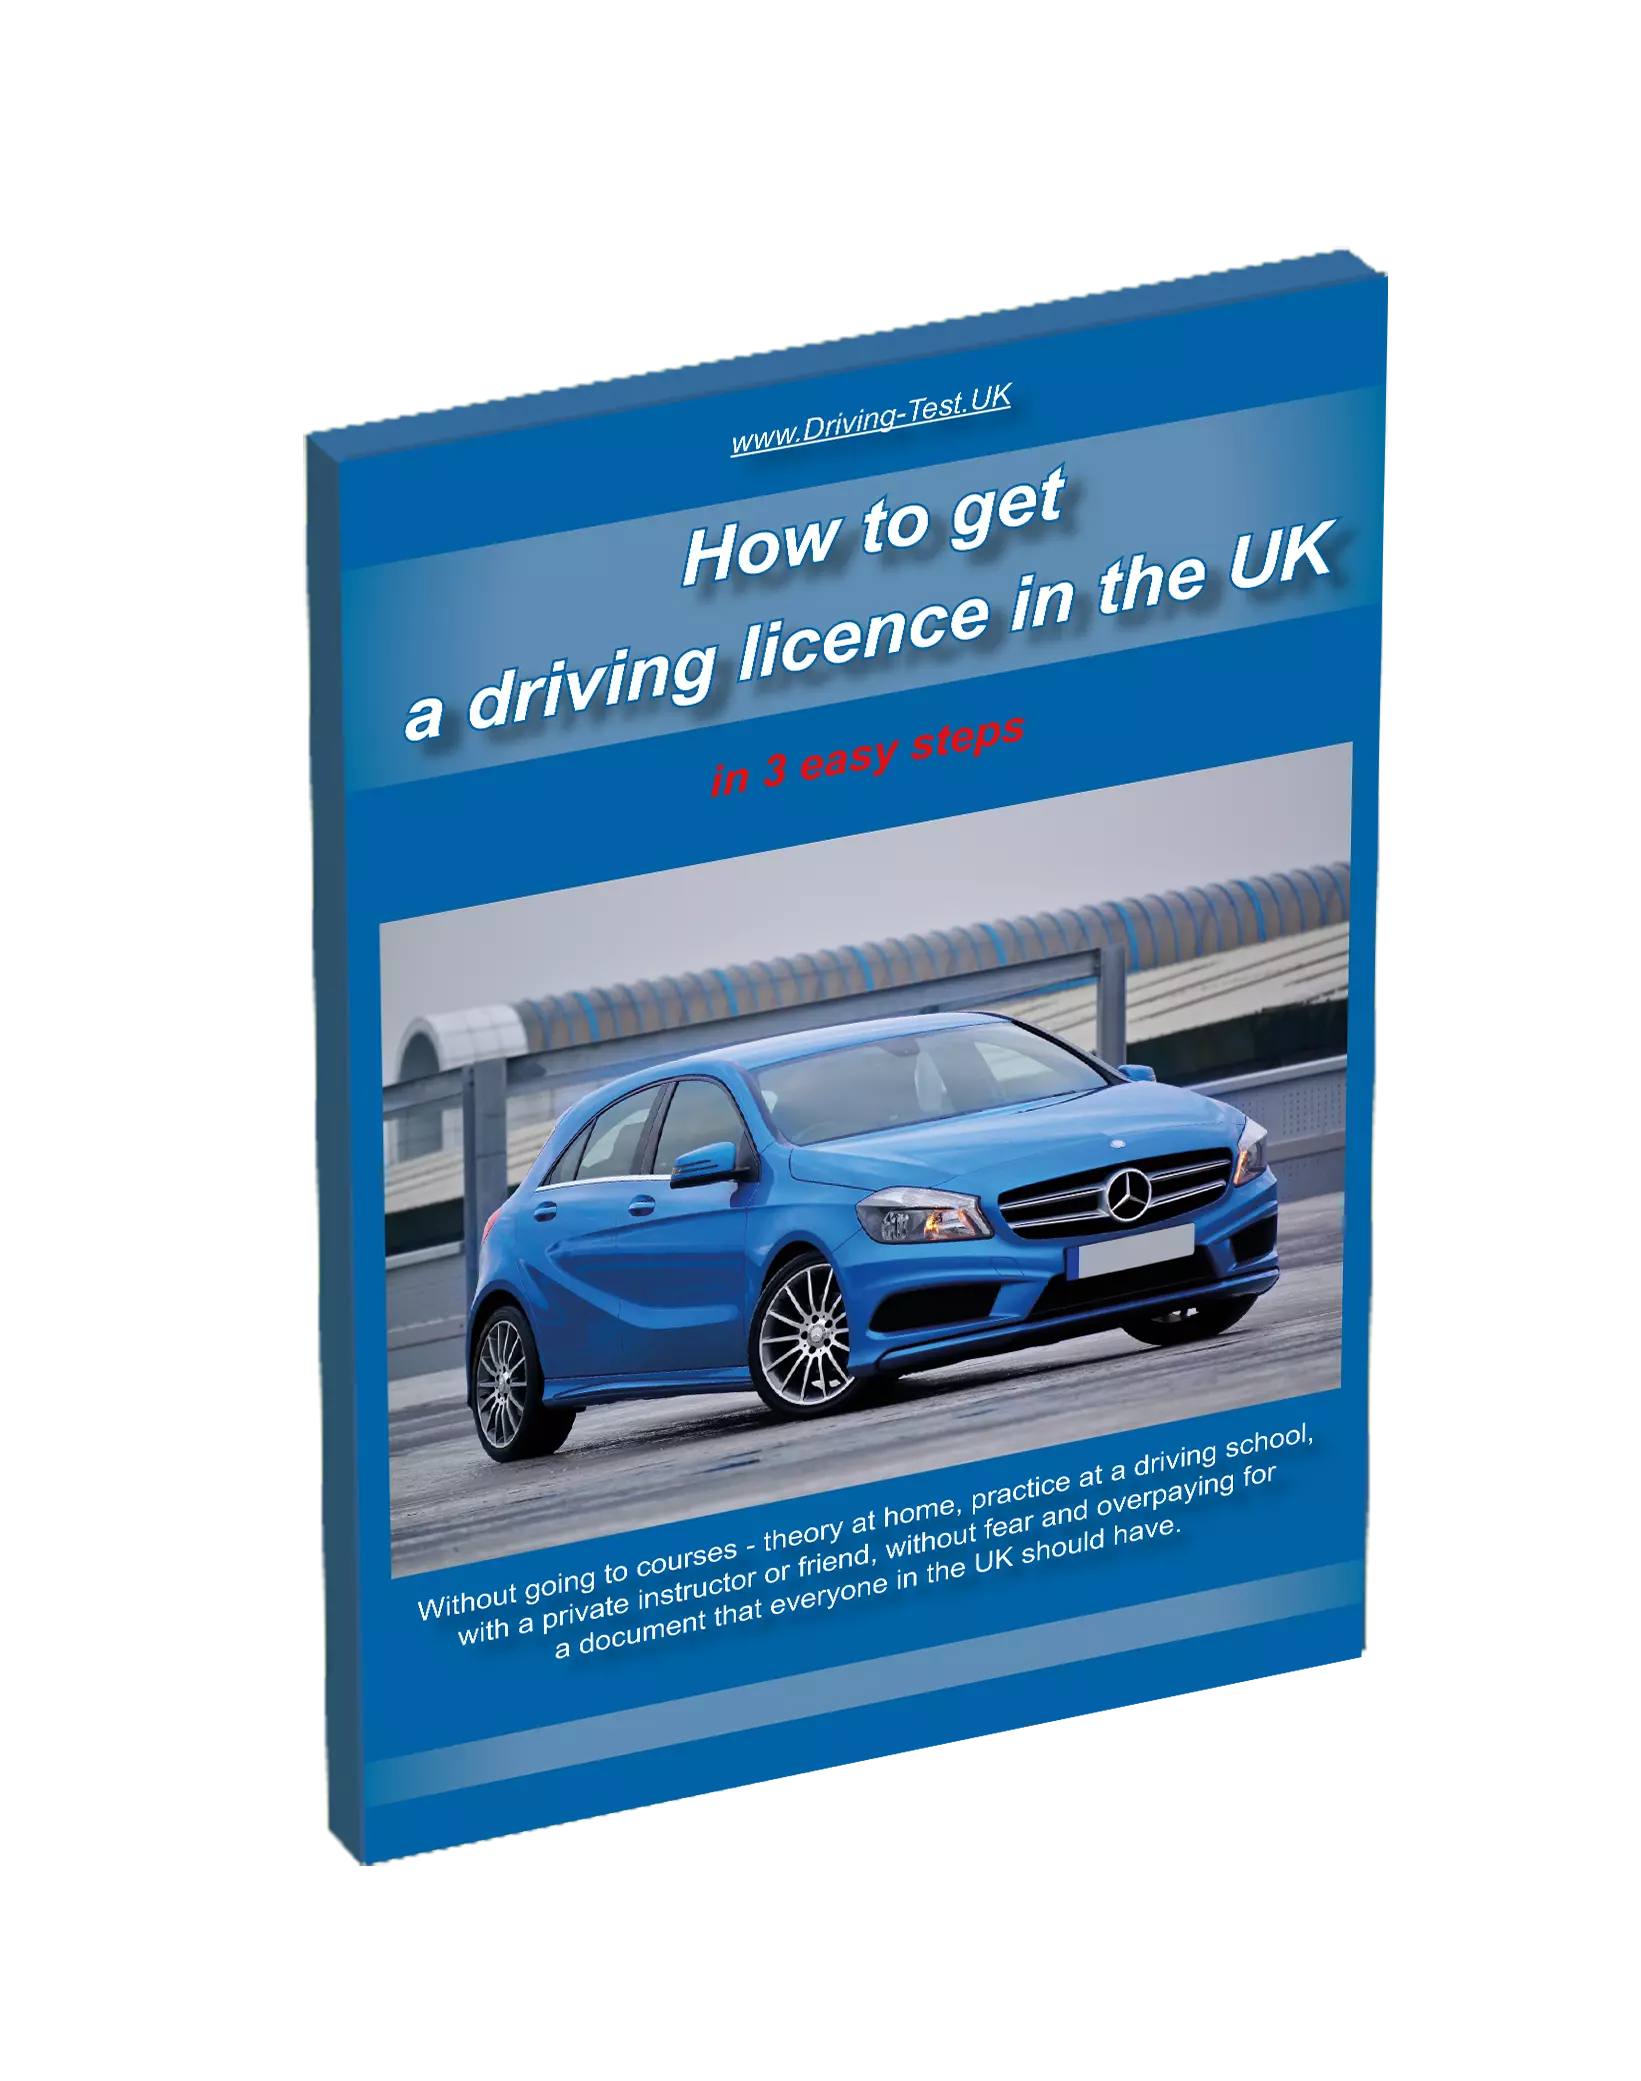 How to get a driving licence in the UK in 3 easy steps